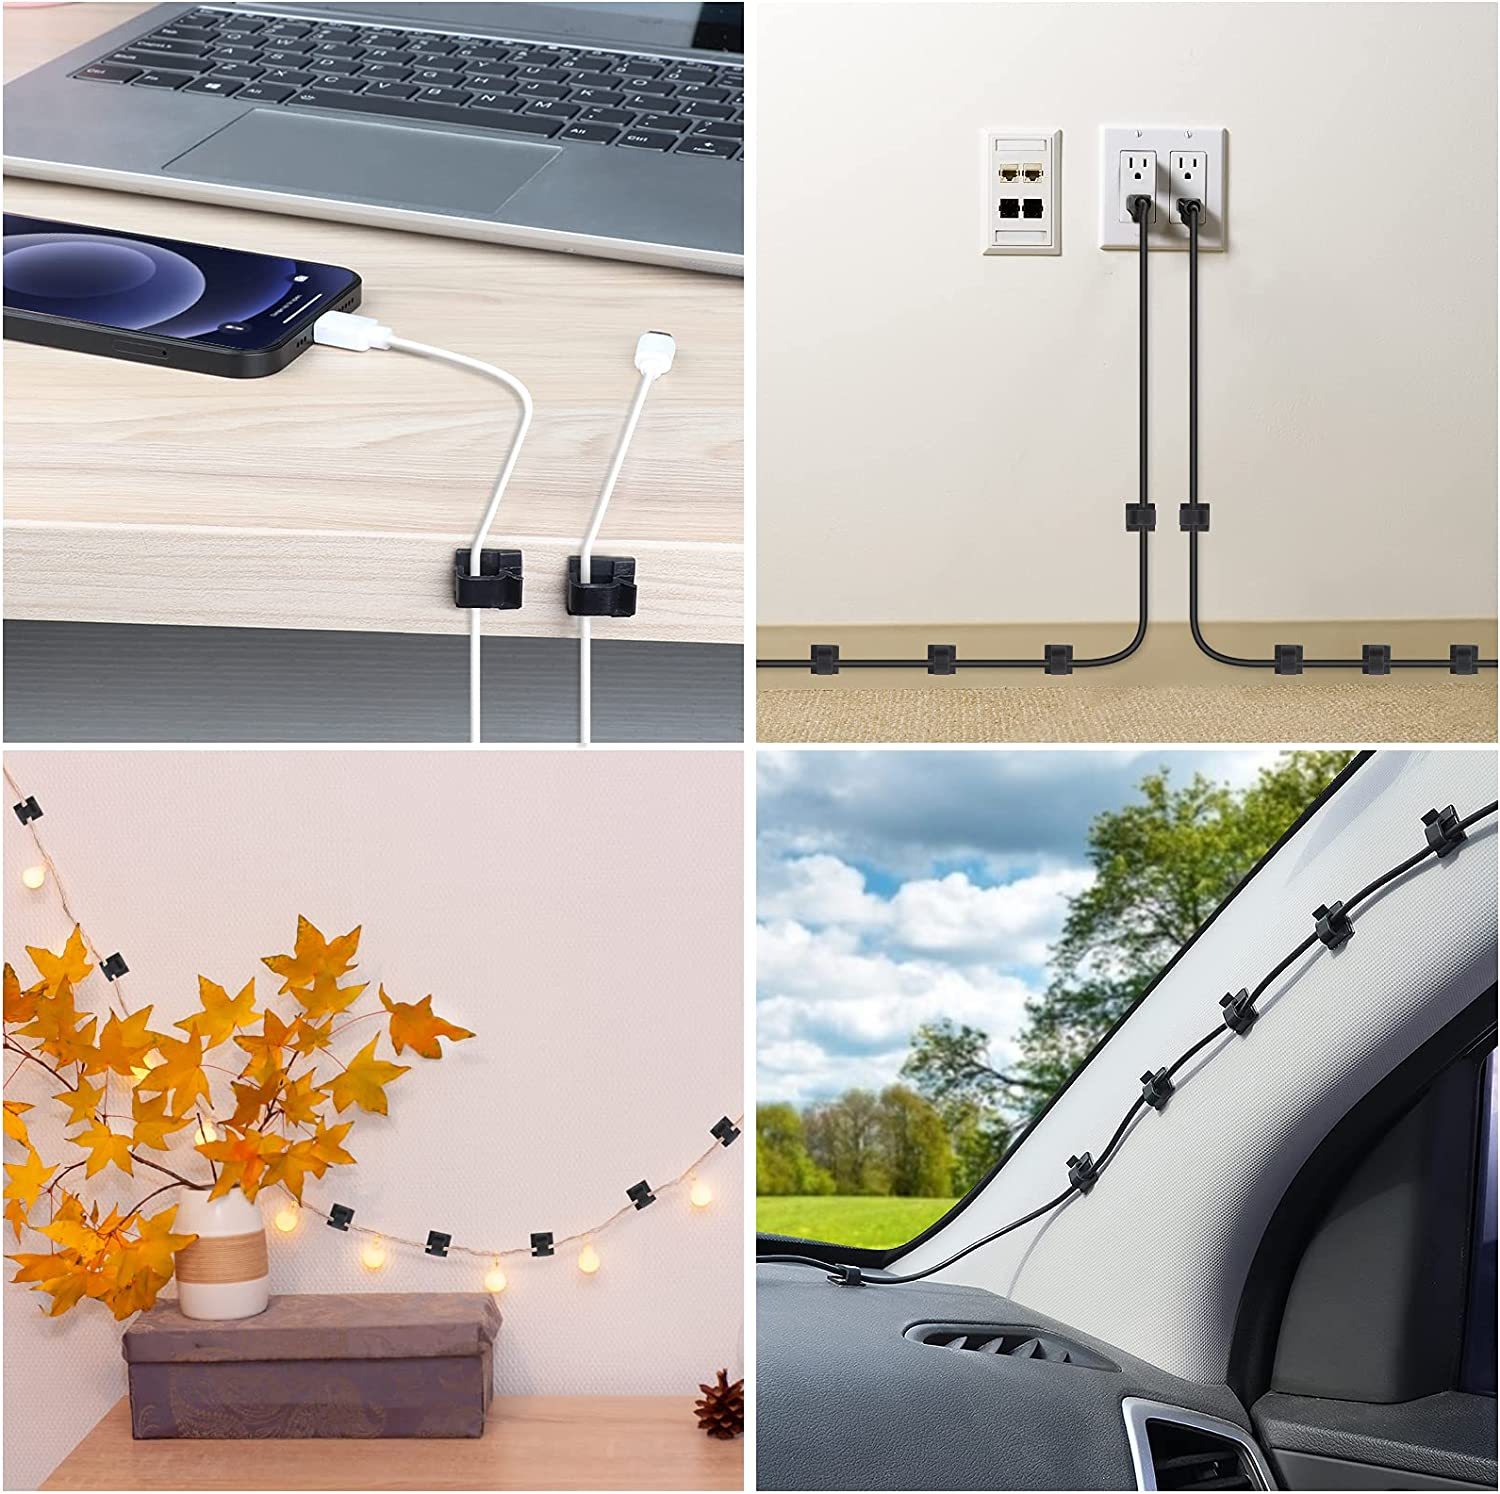 Use a cord holder like this to keep your cables organized and your desk tidy.